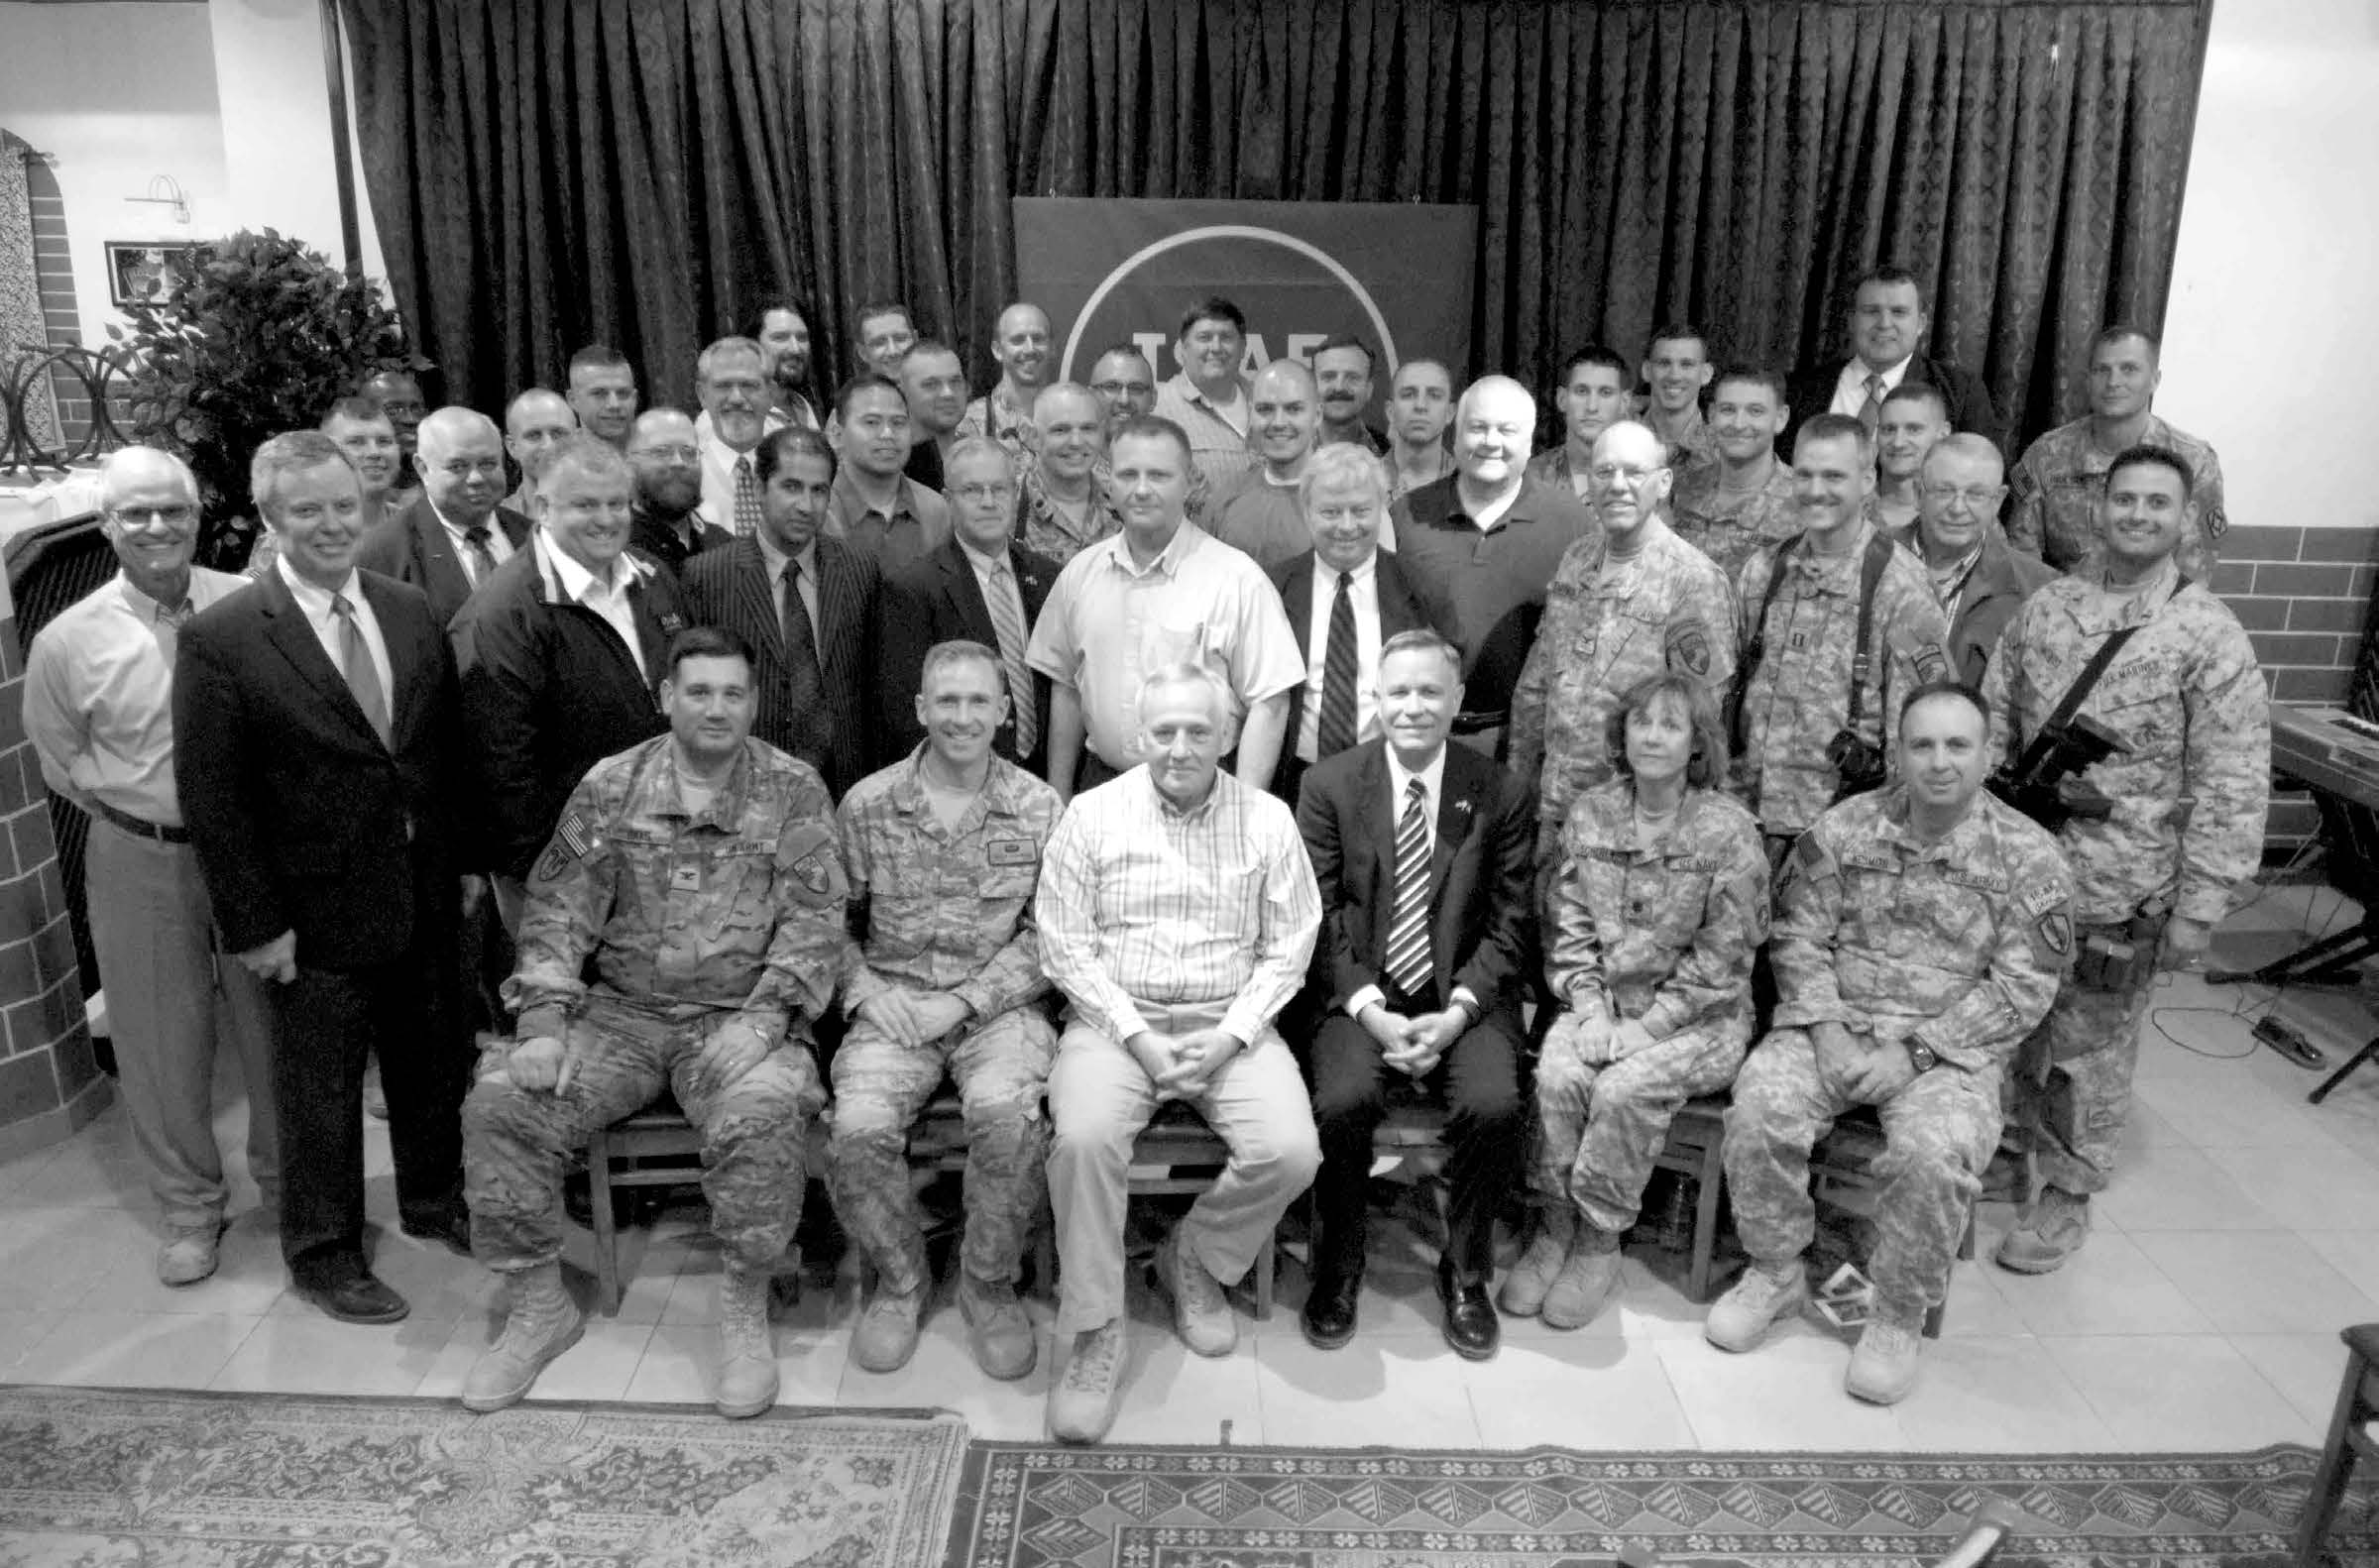 Fifty-eight members of the Church from the Kabul Branch and four nearby service member groups—along with invited guests including the Headquarters, International Security Assistance Force chaplain—attended a meeting to hear Elder Bruce A. Carlson (seated, third from left) speak. Courtesy of Eugene J. Wikle.